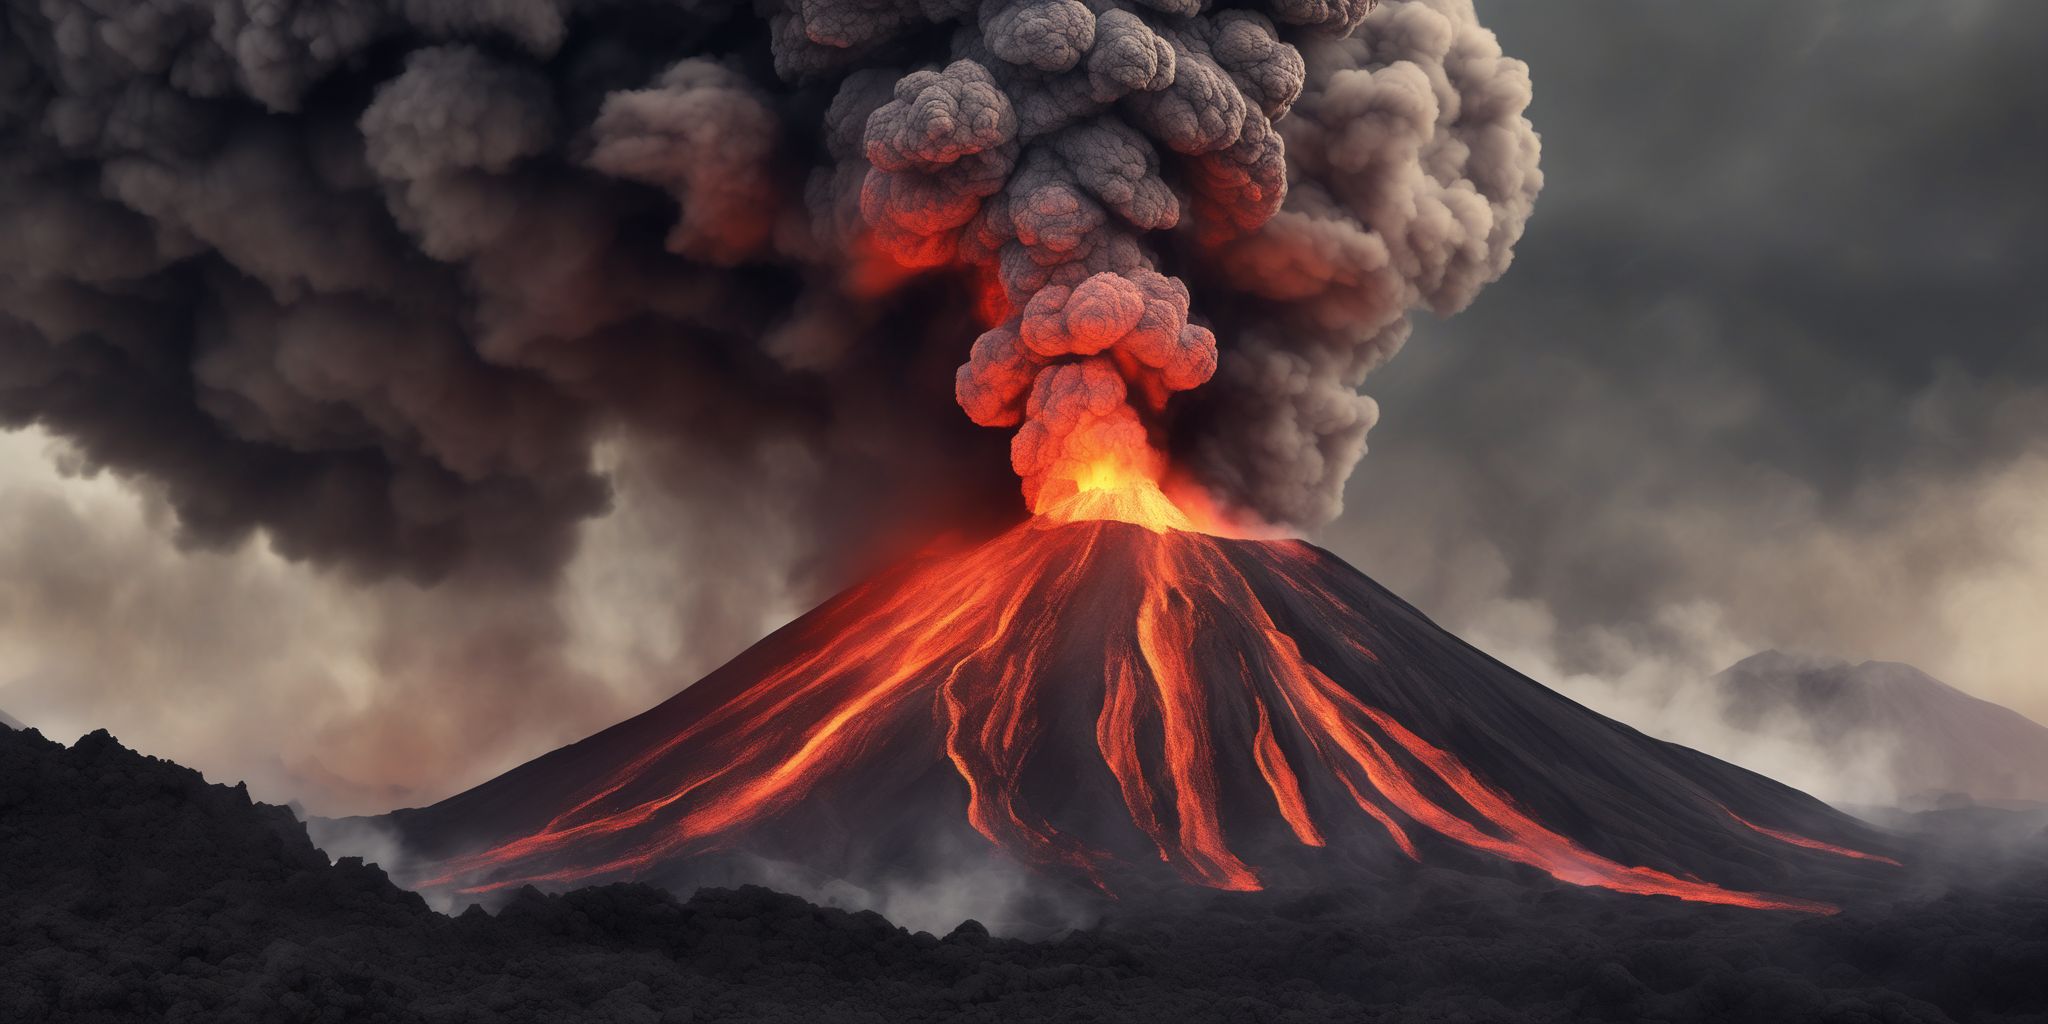 Volcanic eruption  in realistic, photographic style